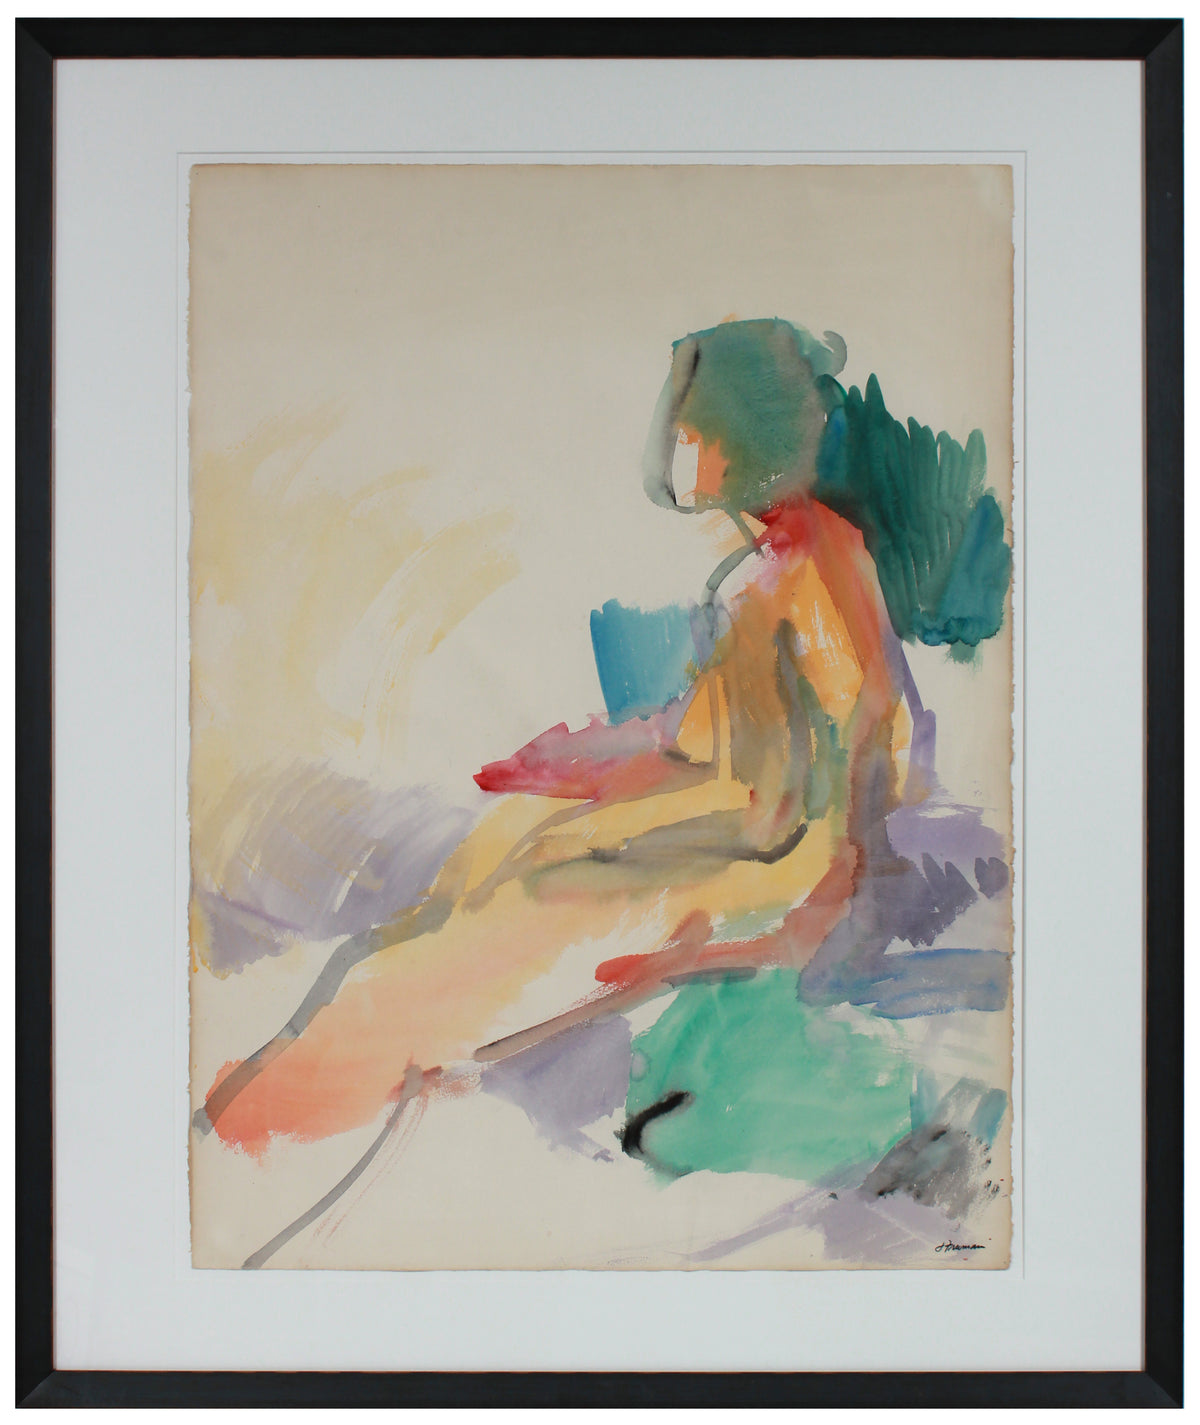 Abstracted Seated Nude in Profile &lt;br&gt;1960s Watercolor &lt;br&gt;&lt;br&gt;#88971